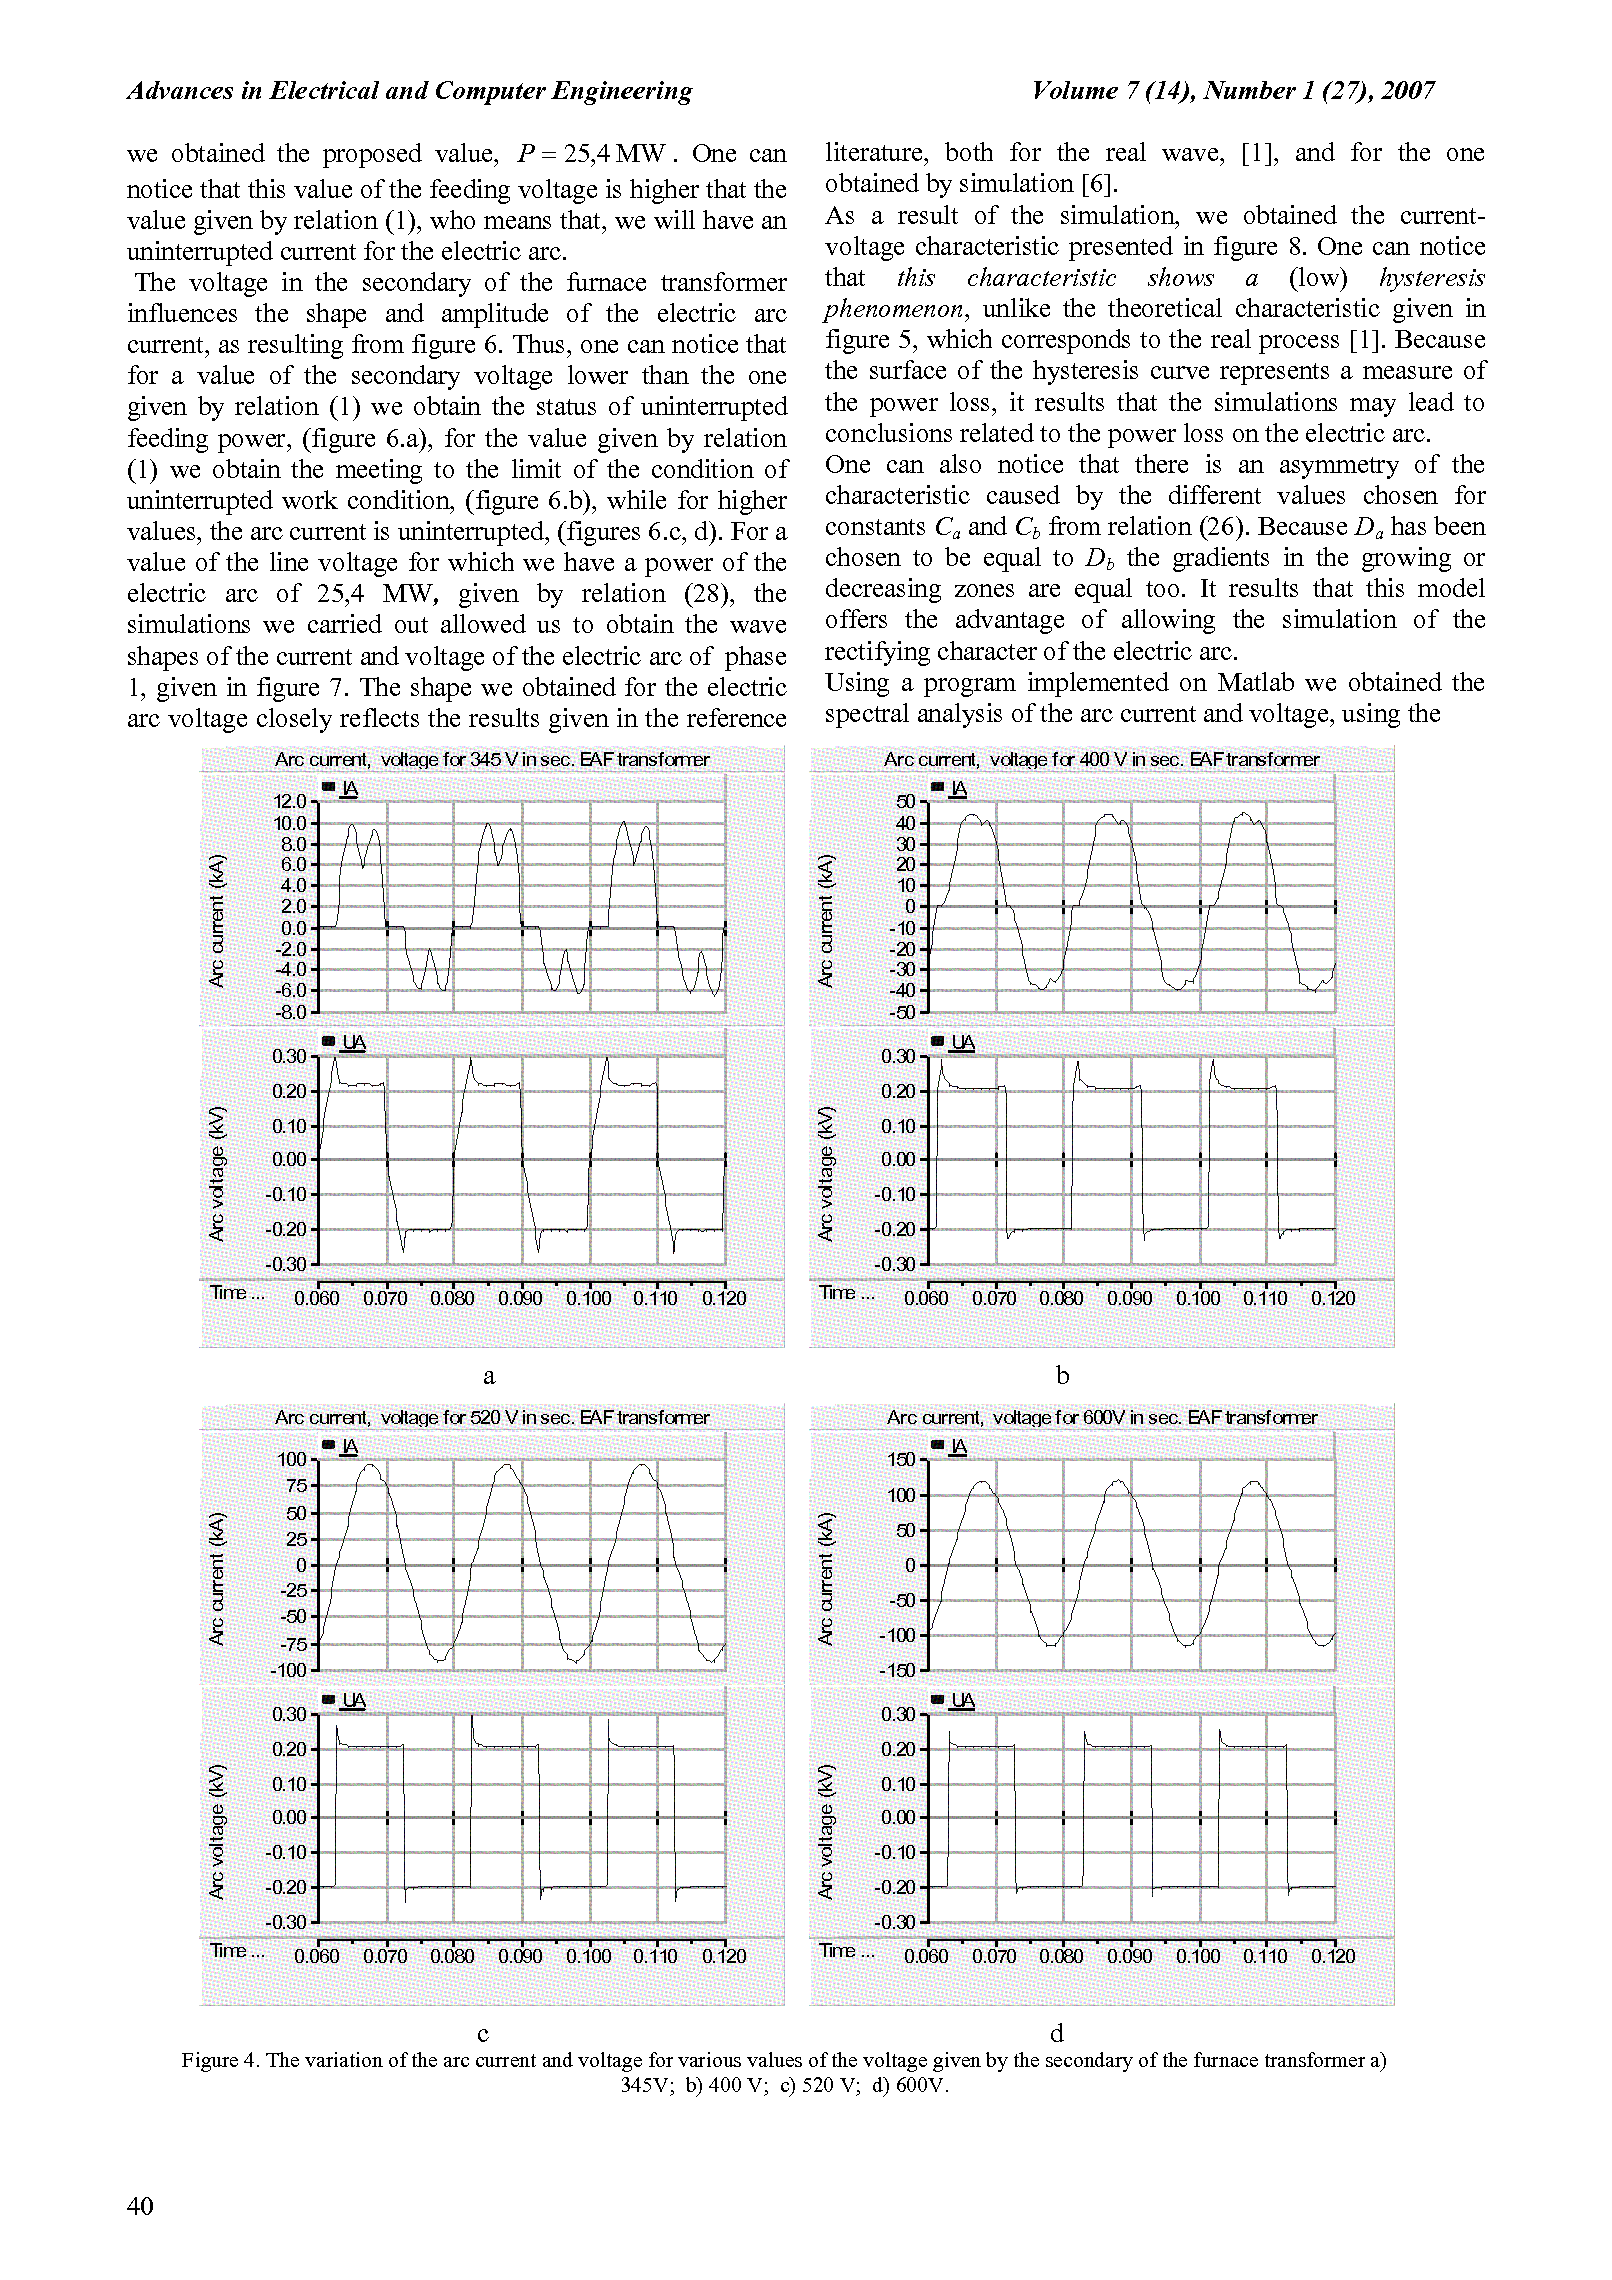 PDF Quickview for paper with DOI:10.4316/AECE.2007.01009